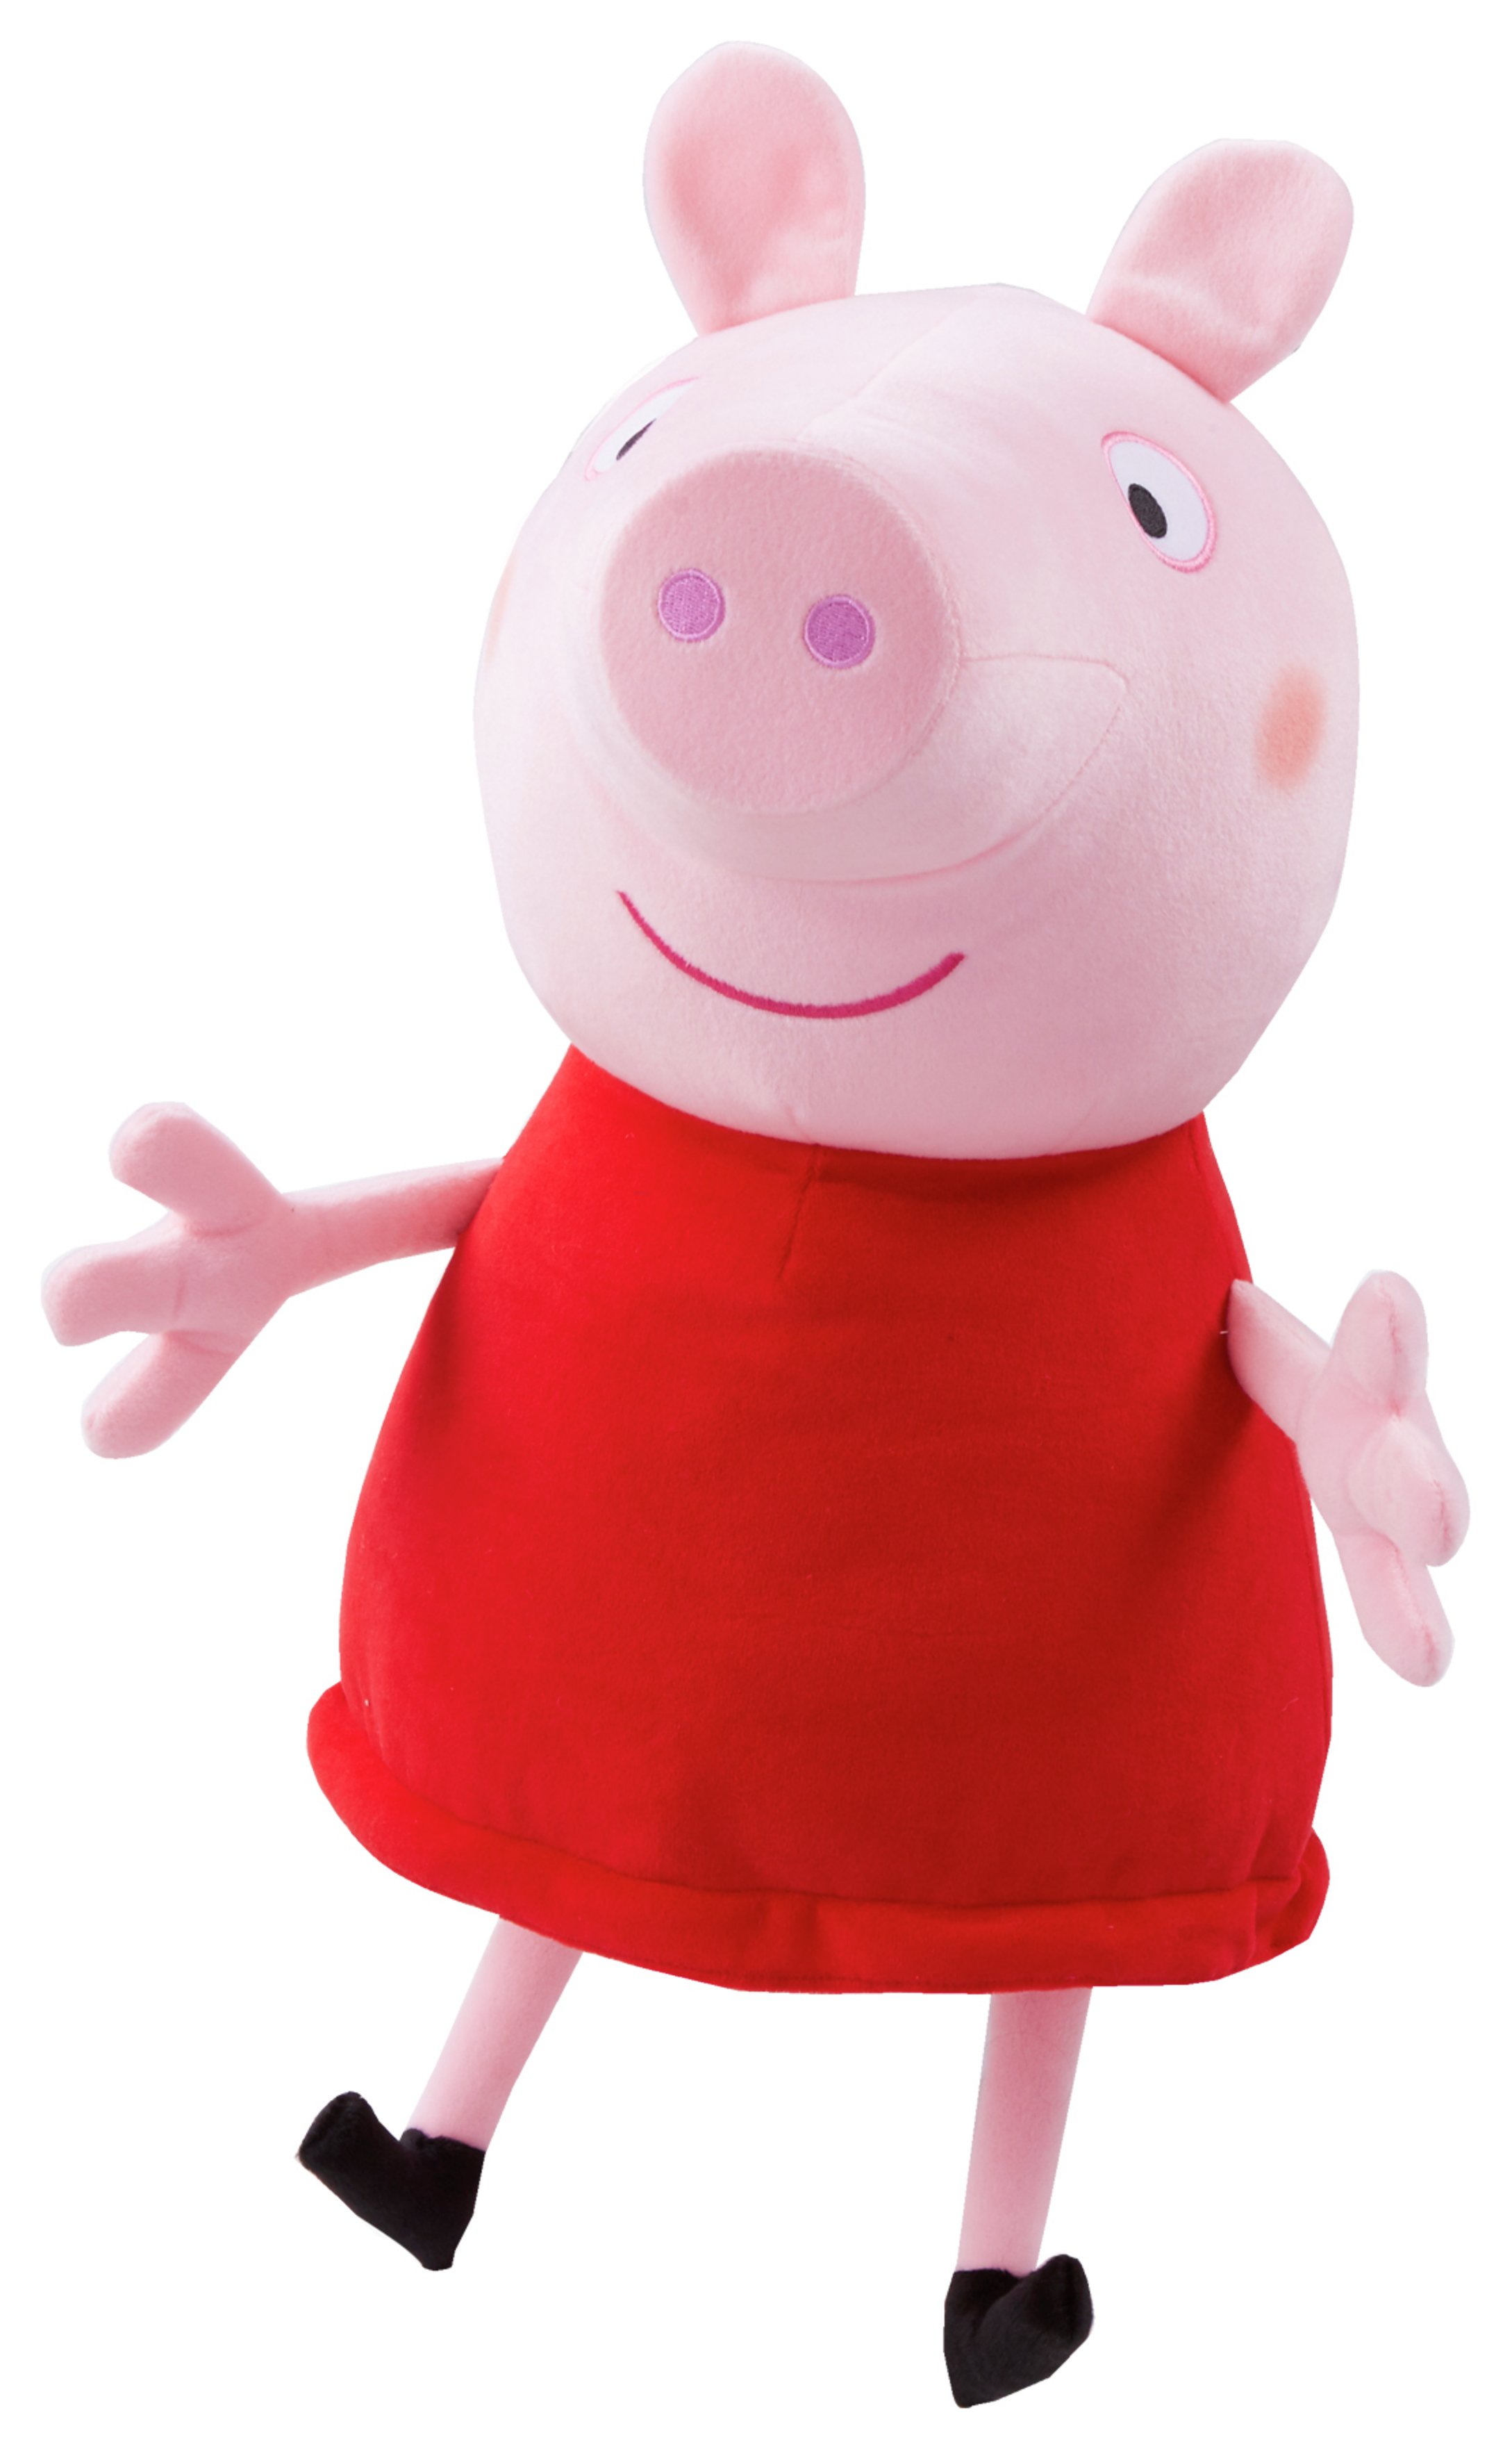 peppa and george soft toys